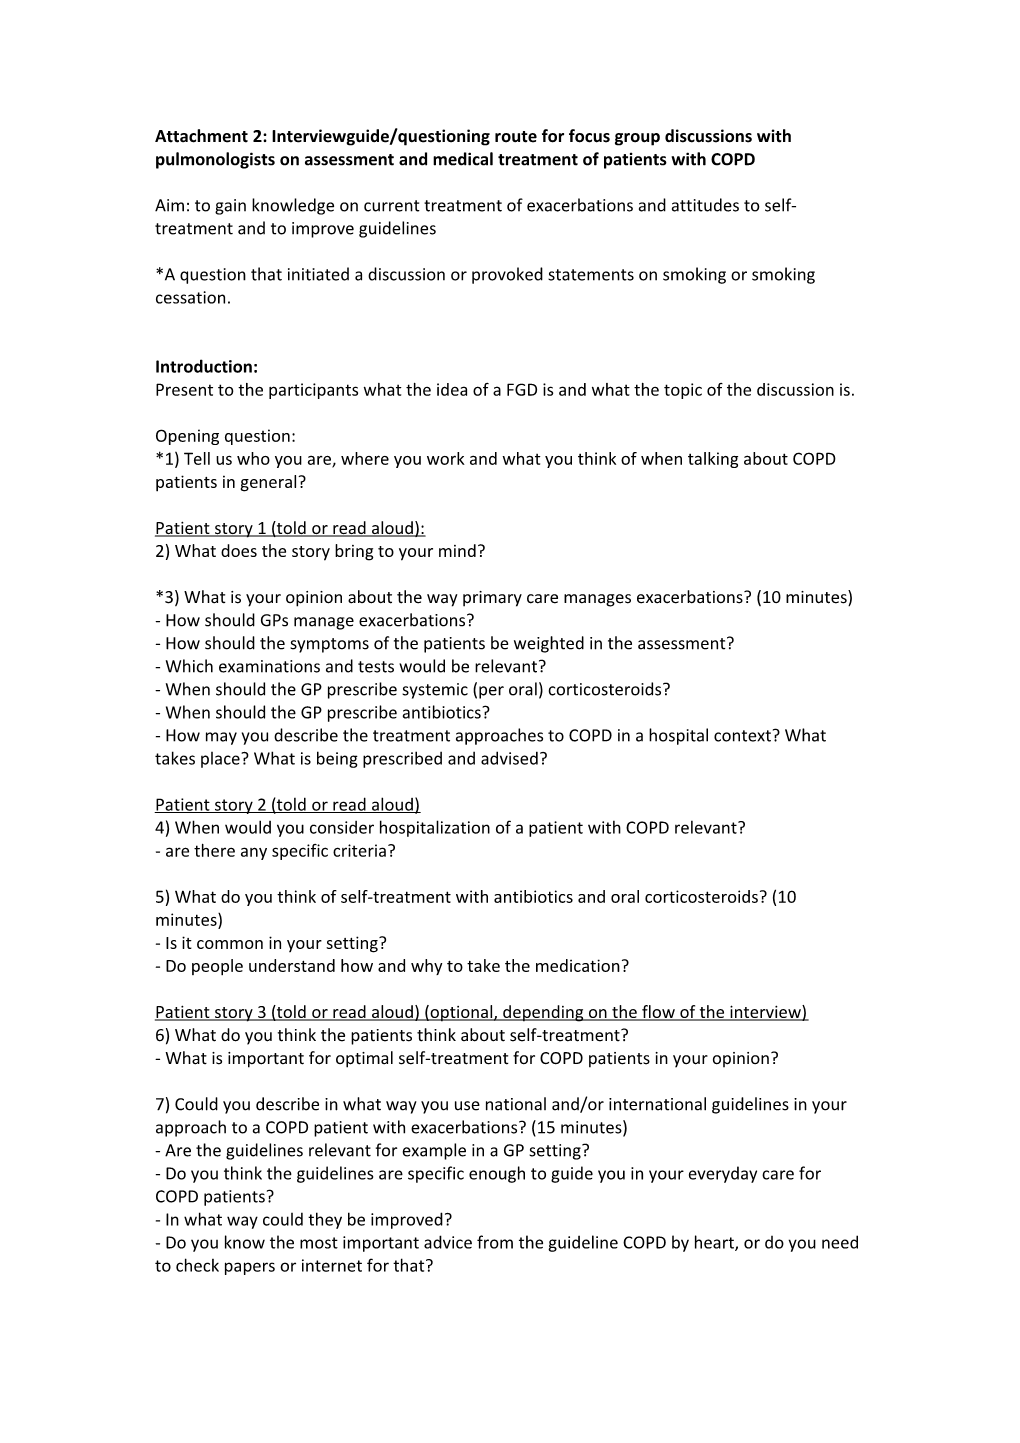 Interviewguide/Questioning Route for Focus Group Discussions with Gps and Pulmonologists